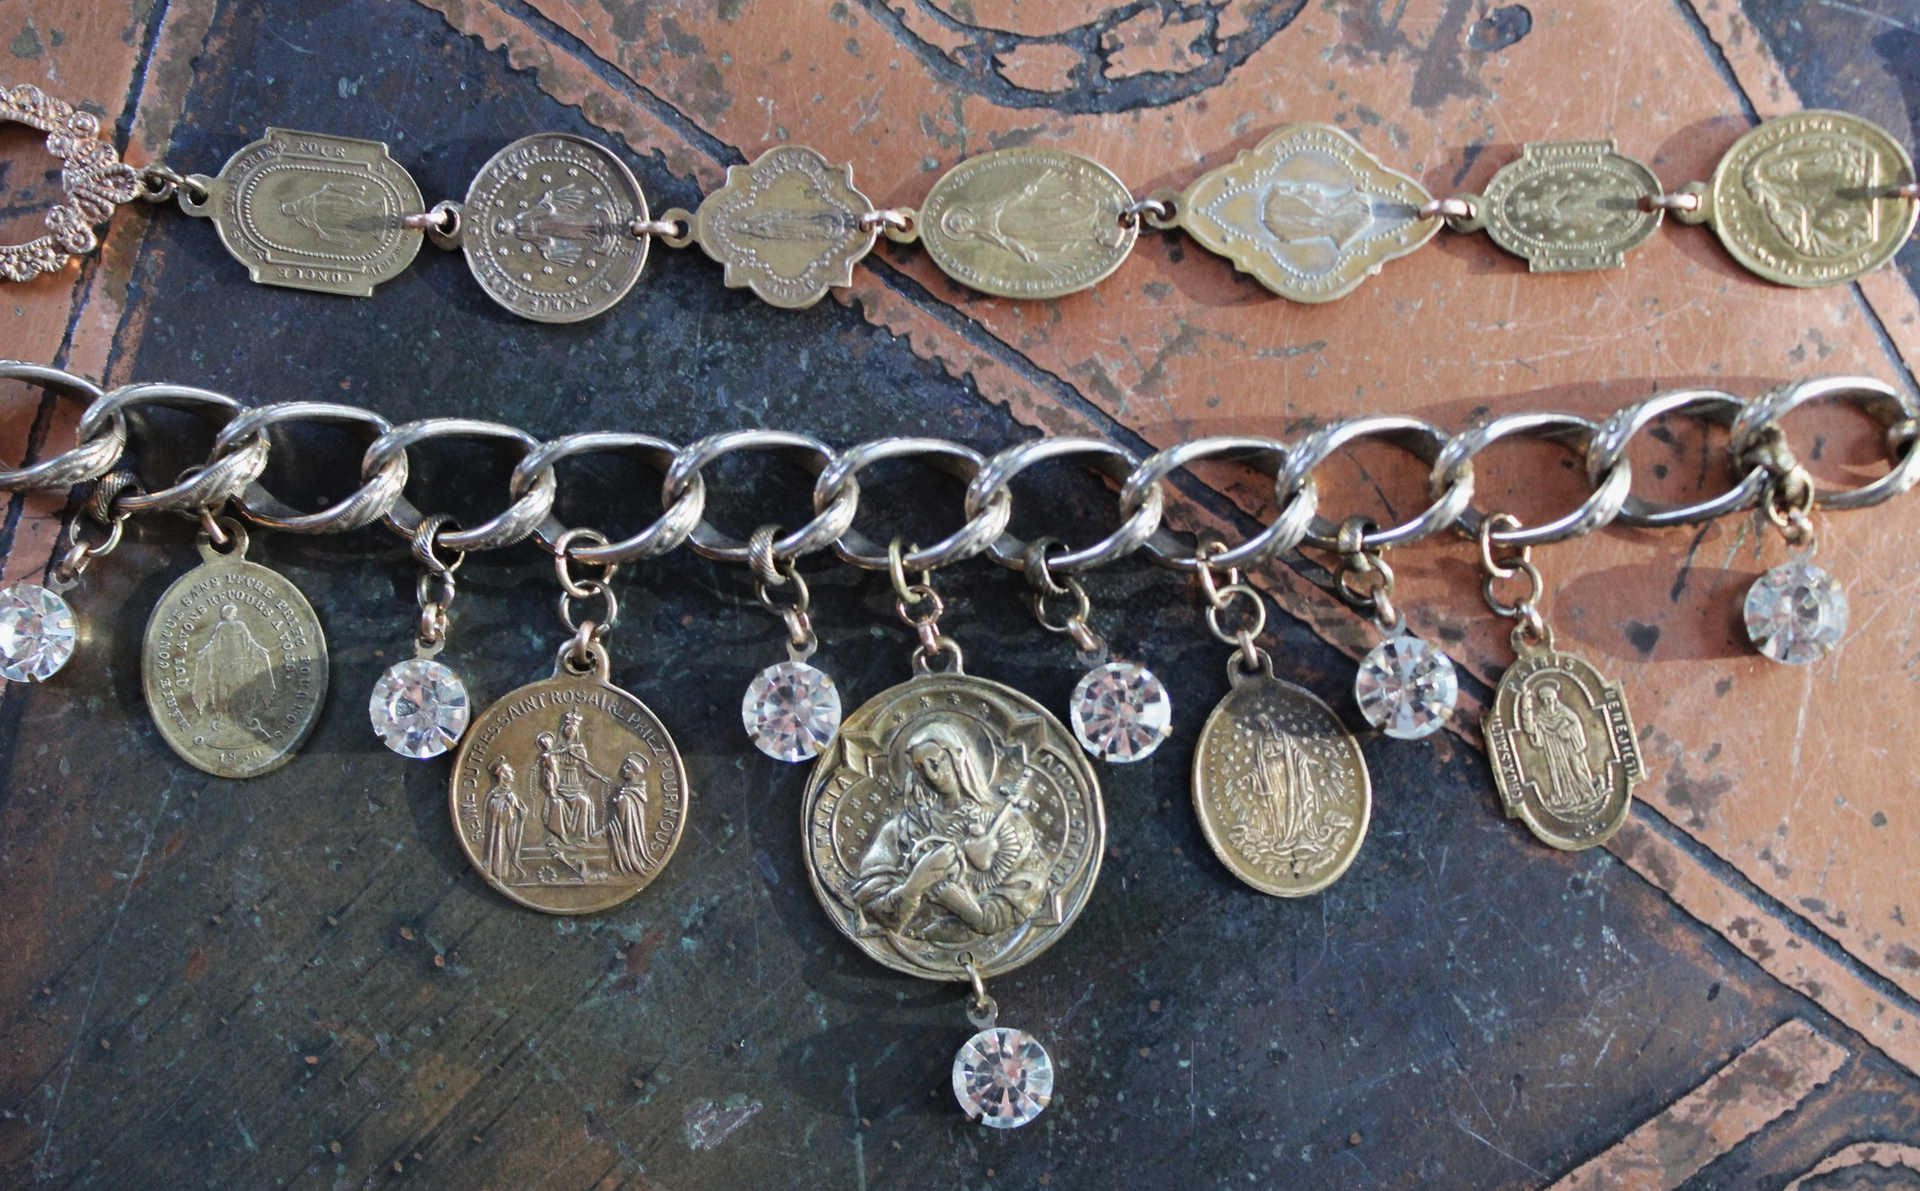 Antique Embossed Link Charm Bracelet Set with Antique French Medals and Cup Set Faceted Rhinestone Drops